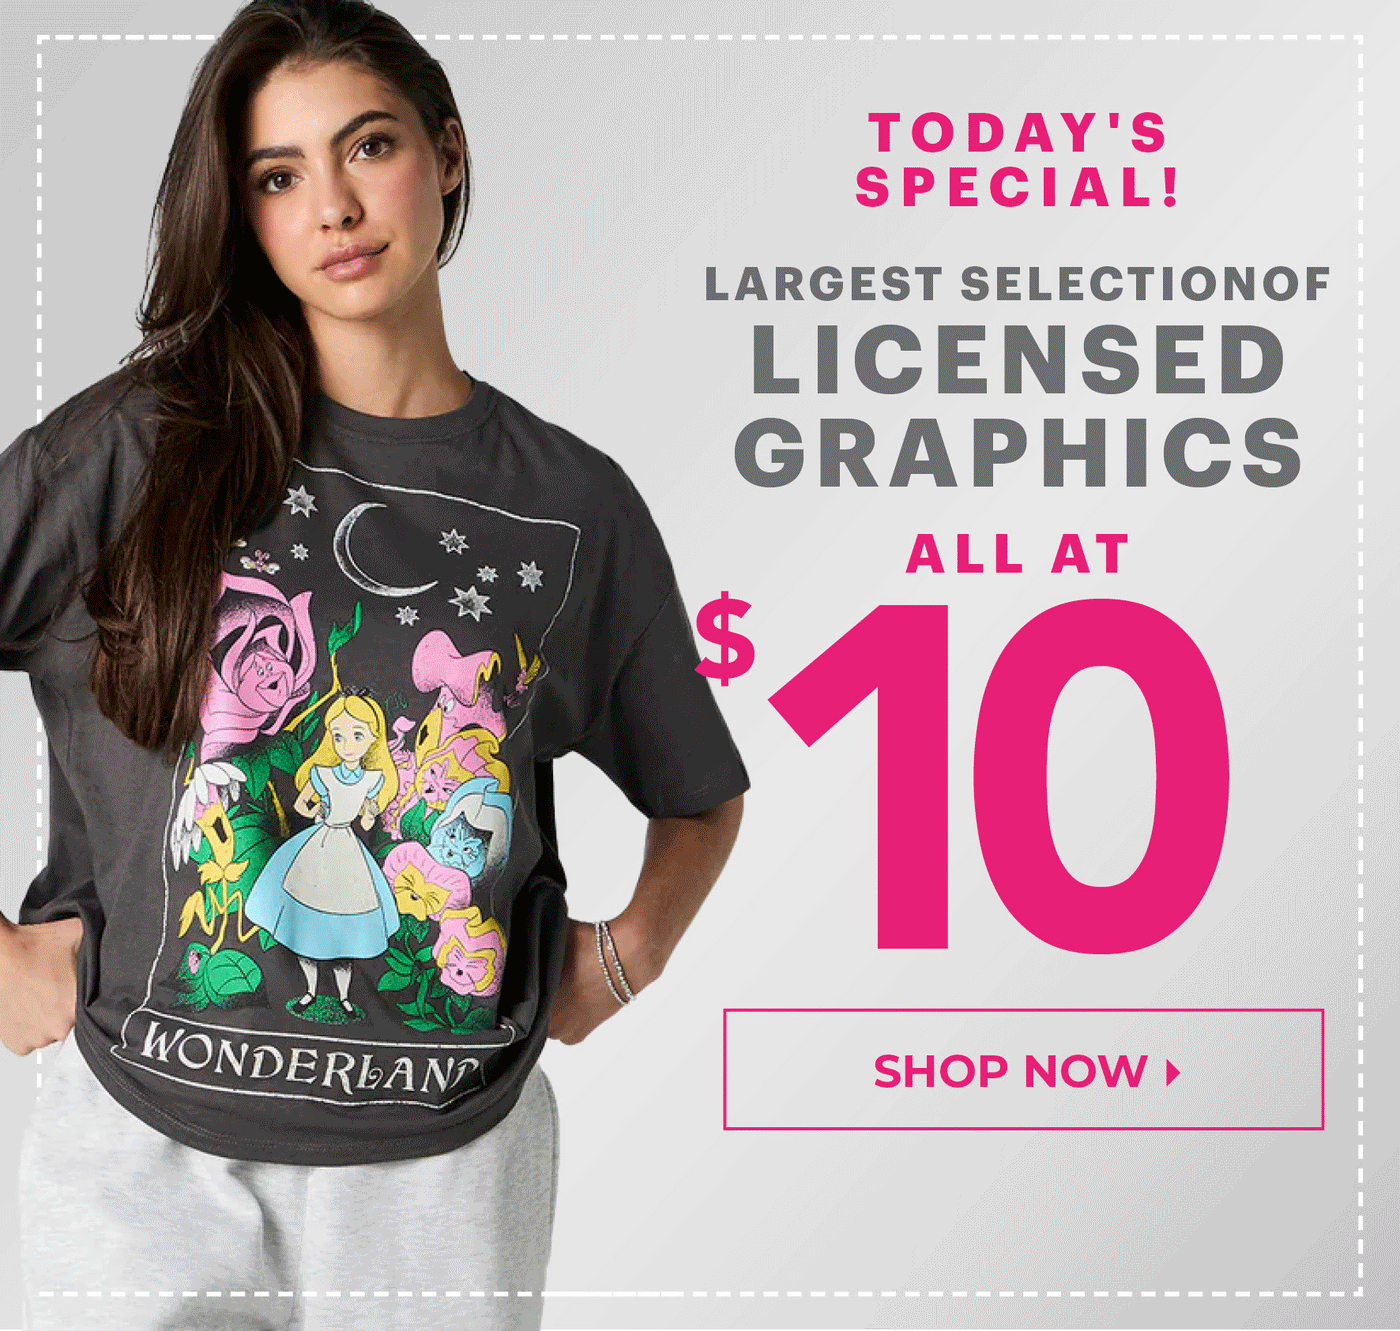 womens-tops_licensed-graphics